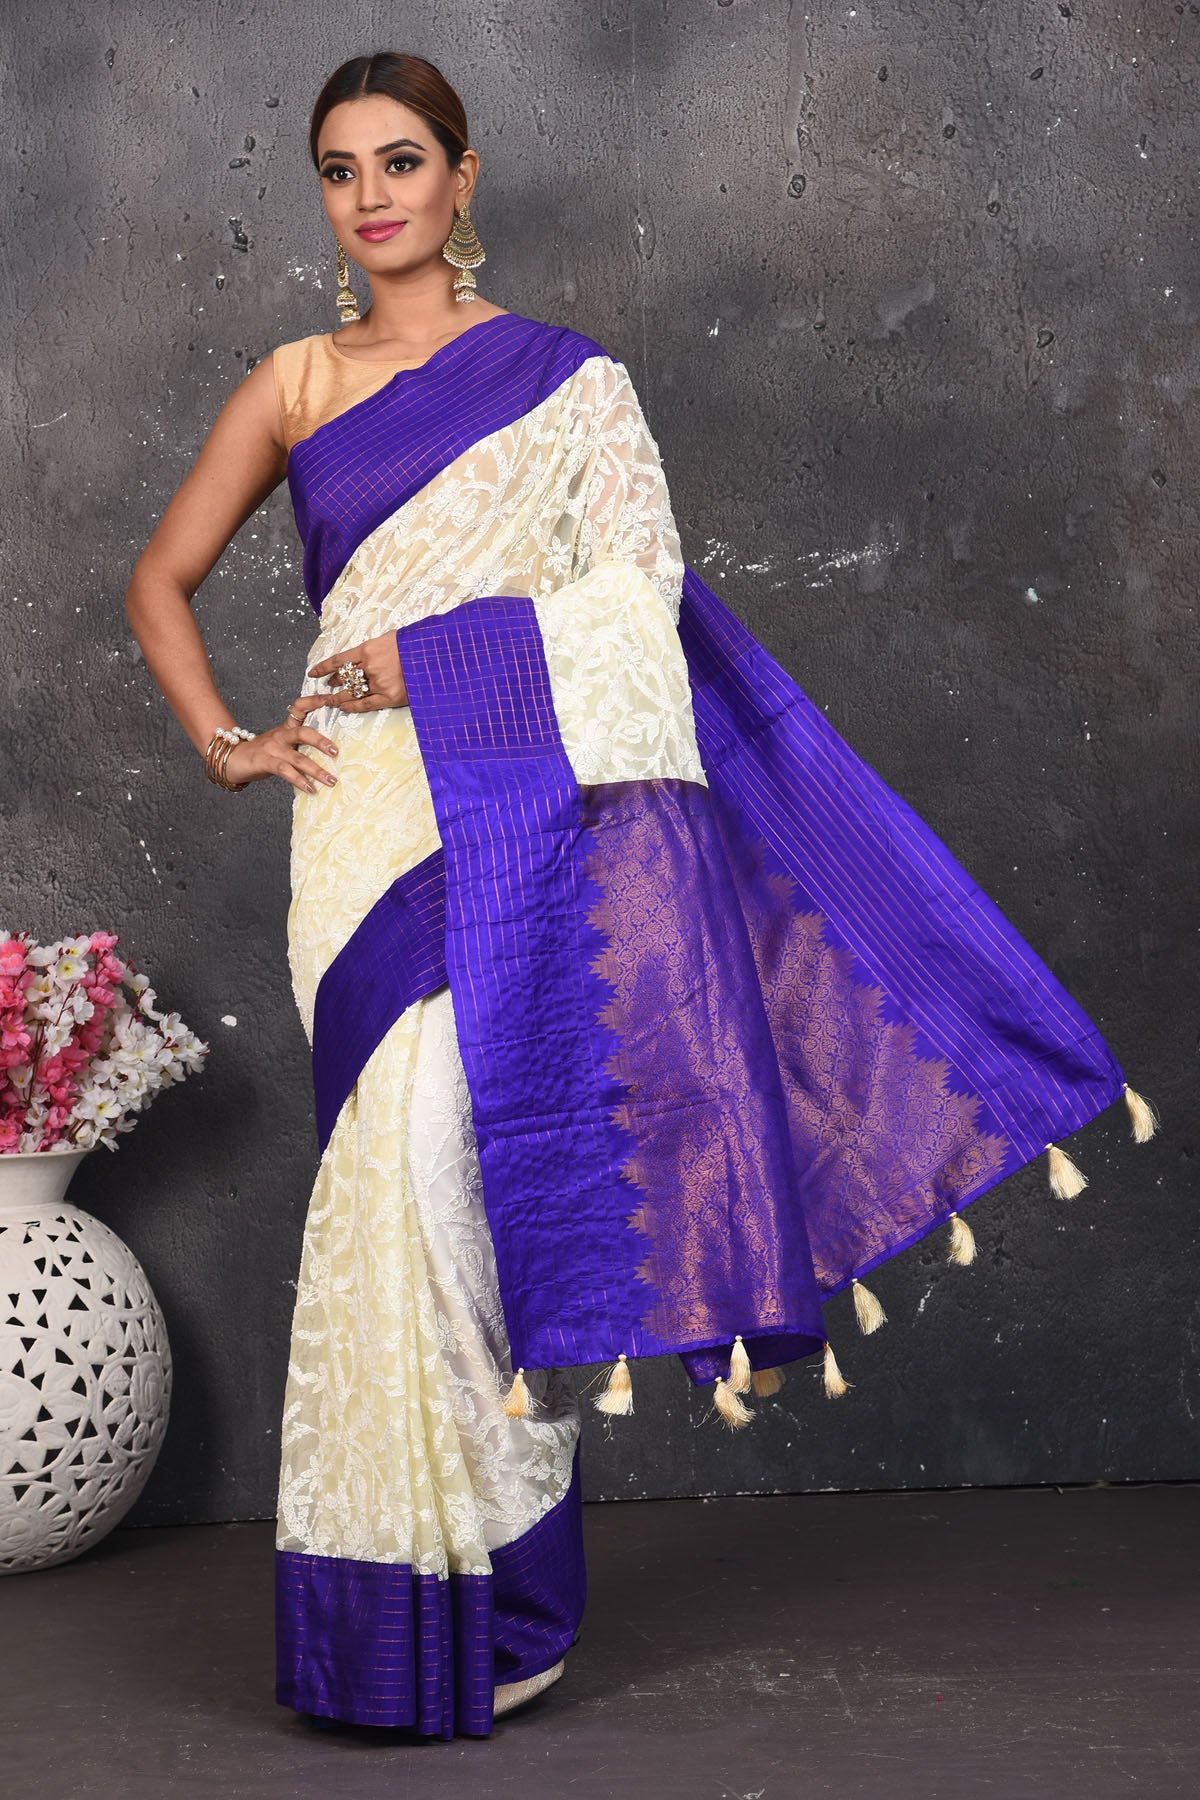 Buy this exquisite Off-white and violet chiffon box printed saree with chikankari hand-embroidered online in USA. Style this lucknawi sari with a potli bag and high heels for a flawless look which has gorgeous heavy pallu with dull-gold zari work. This saree is definitely the epitome of beauty and a must have in your collection. Buy designer handwoven chikankari sari with any blouse from Pure Elegance Indian saree store in USA.- Full view with open pallu.